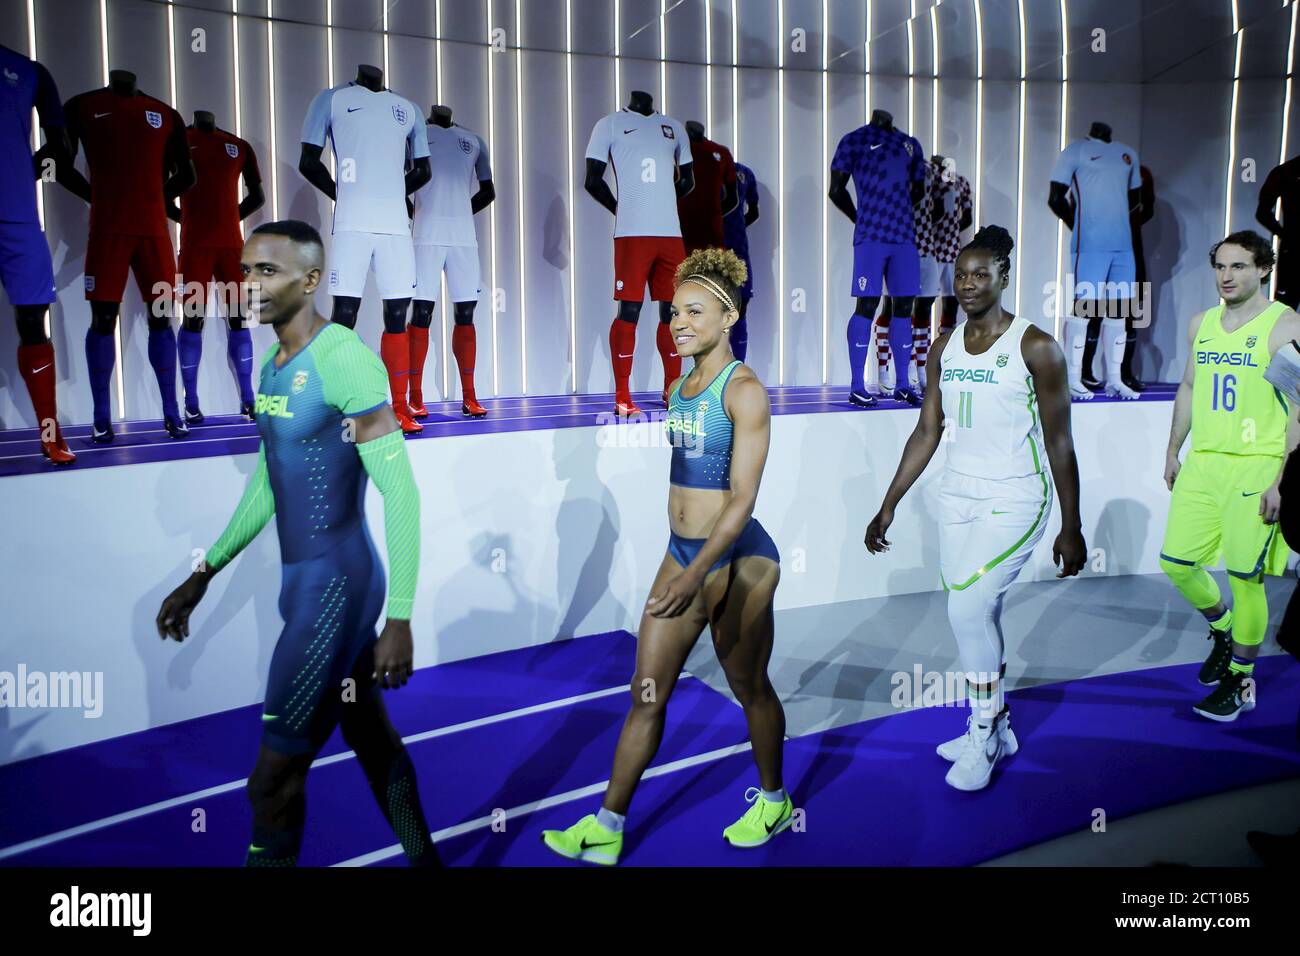 Athletes from different countries and sports pose wearing new jerseys and  footwear made by Nike during an unveiling event in New York, March 17,  2016. REUTERS/Eduardo Munoz Stock Photo - Alamy